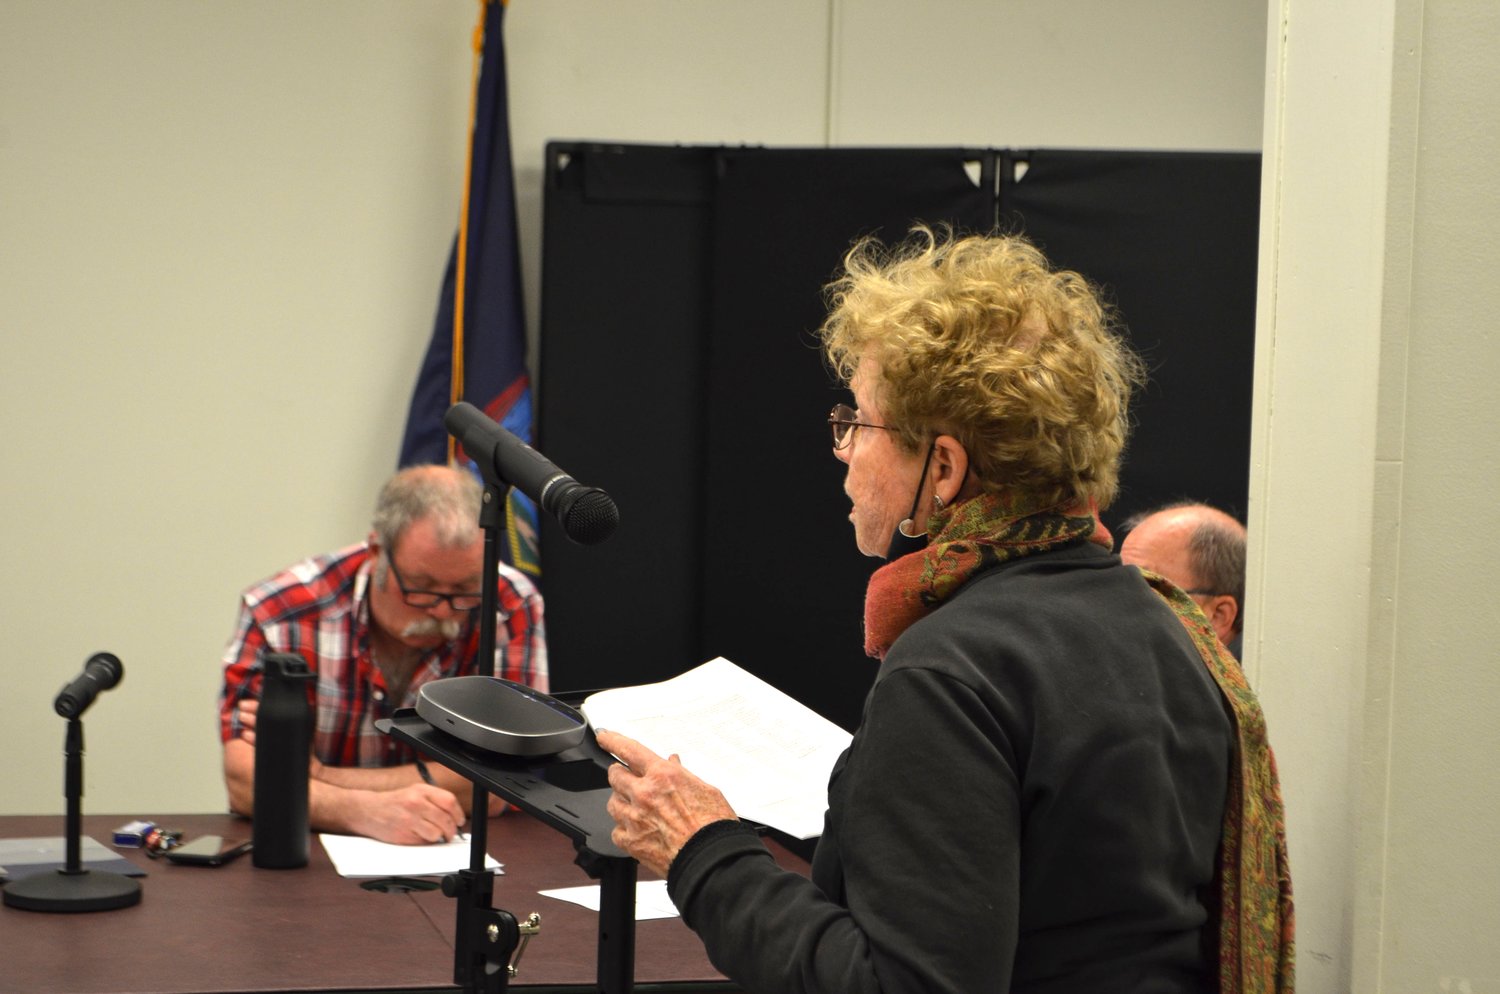 Tusten resident Susan Sullivan discussing proposed changes to the town's zoning laws.